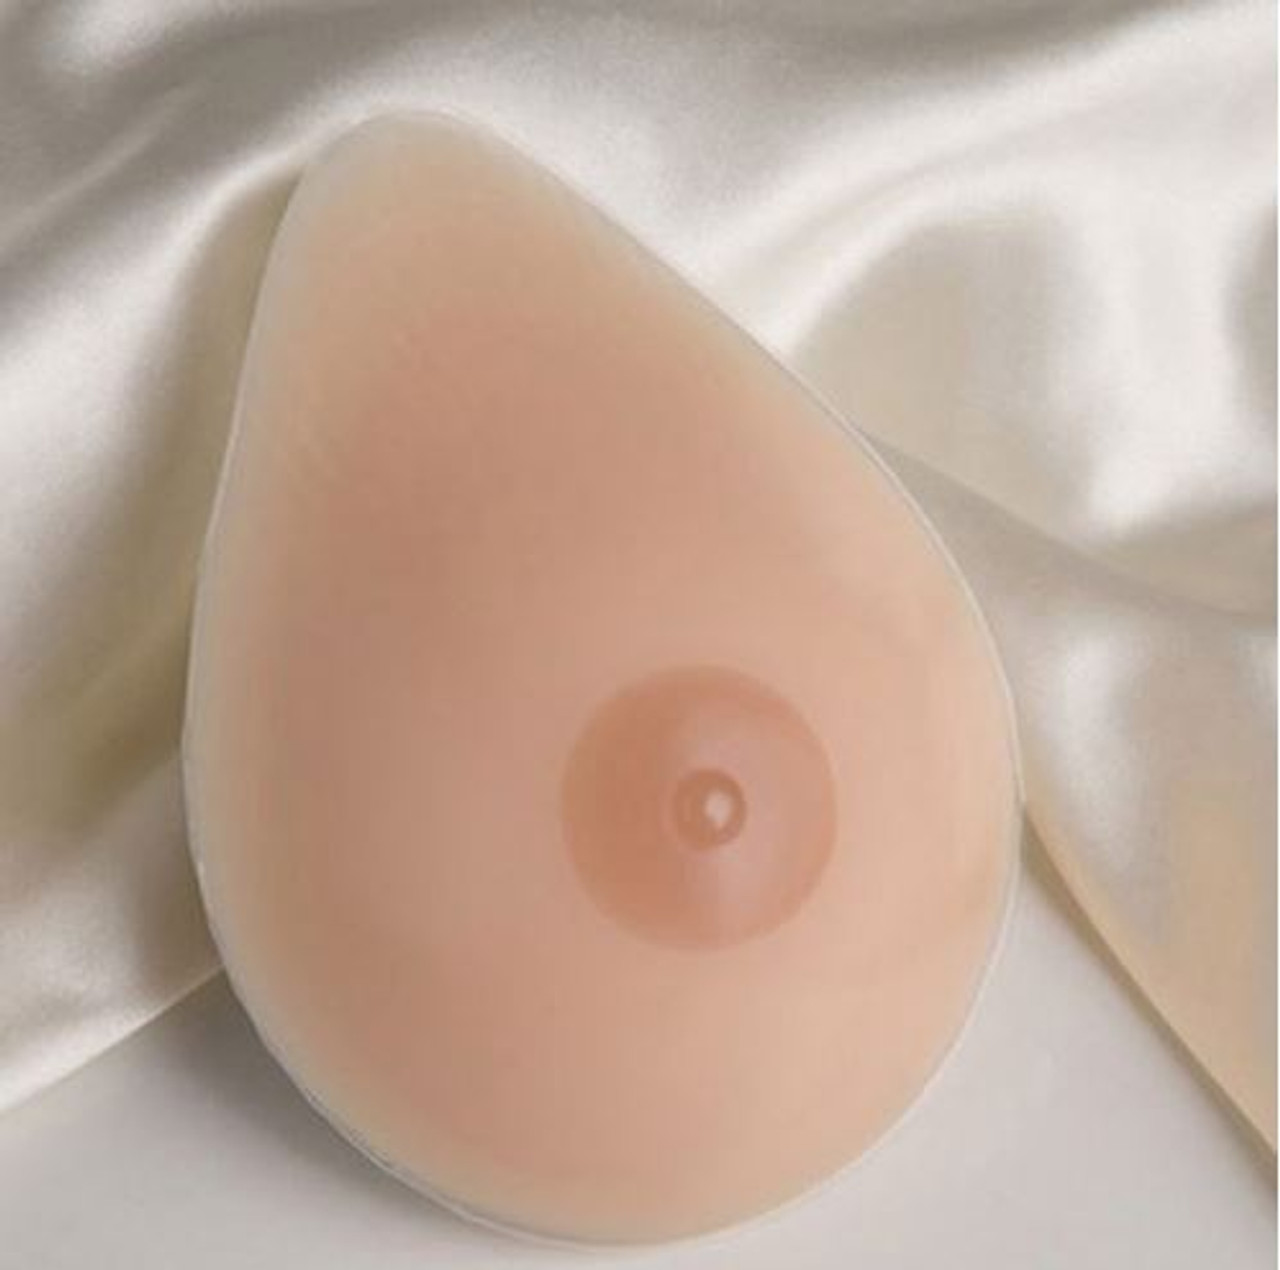  One Pair A- Cup Asymmetrical Shape Silicone Breast